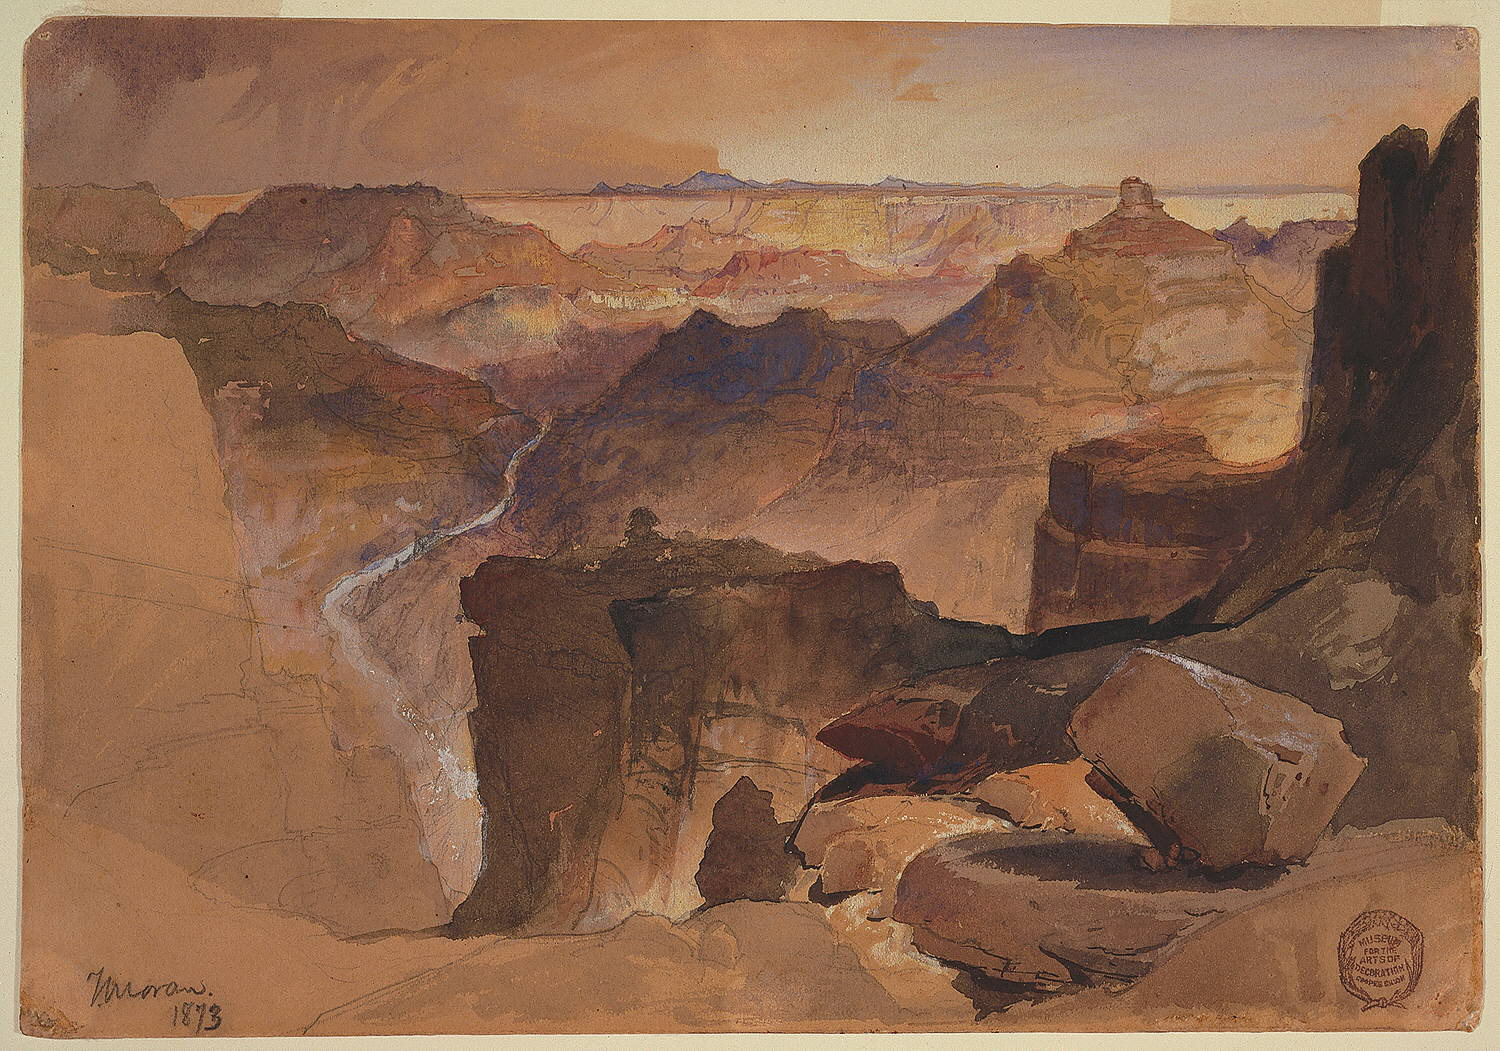 Image features a view of the Grand Canyon. Rock formations in the foreground and to the left are loosely sketched in pencil. The Colorado River appears as a white stripe winding through the center of the composition, between cliff faces painted with bright bands of blue, yellow, and rose washes. Dark clouds in the distance indicate an approaching storm. Please scroll down to read the blog post about this object.